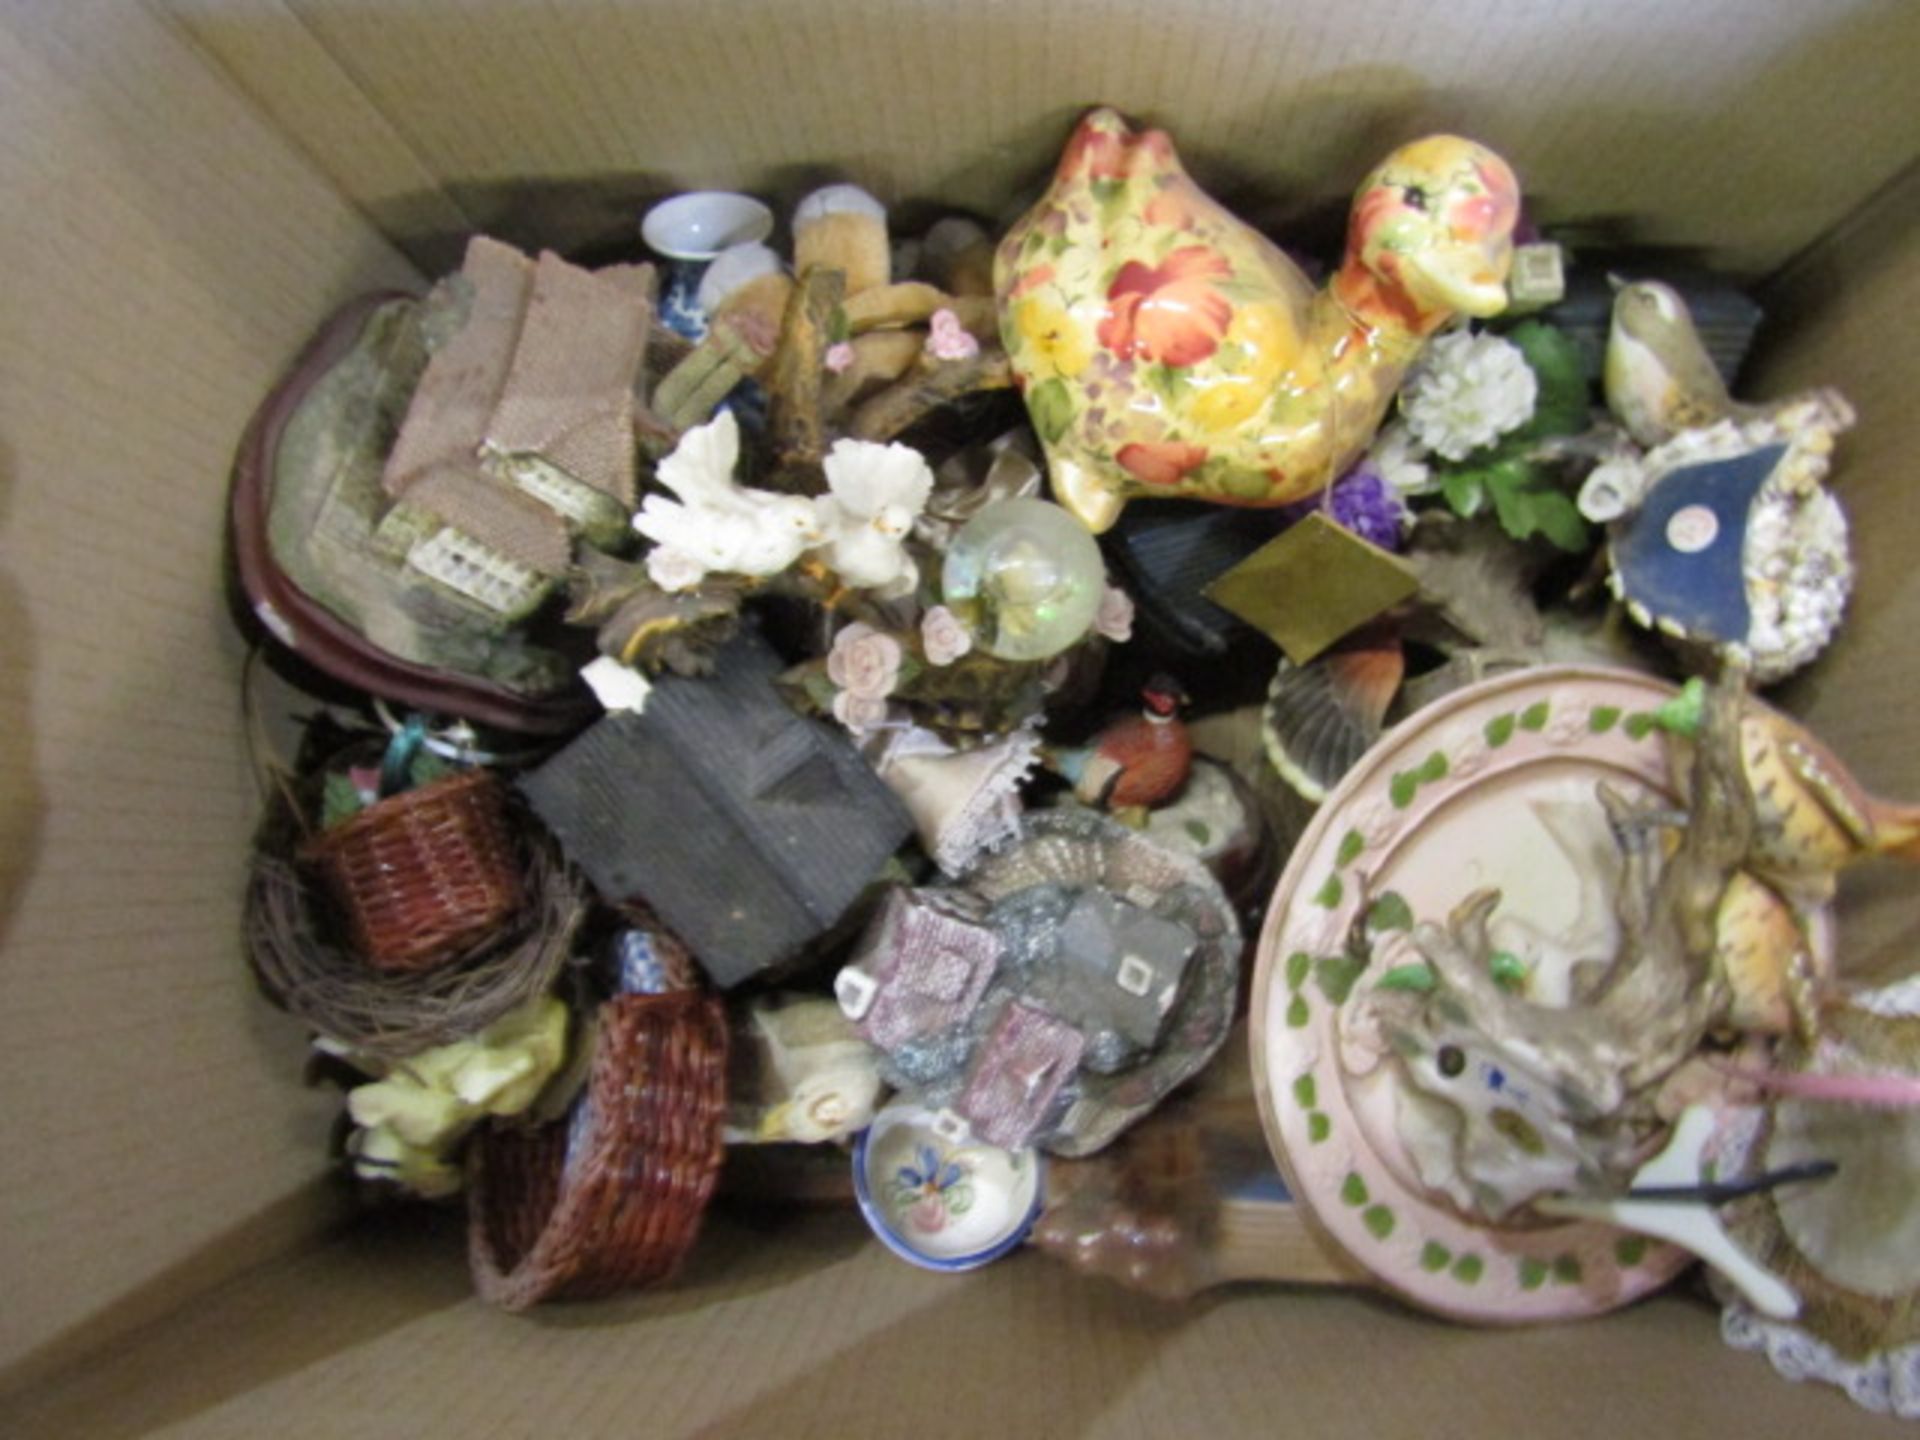 A stillage of china, glass and sundry items Stillage not included and all items must be removed - Image 12 of 15